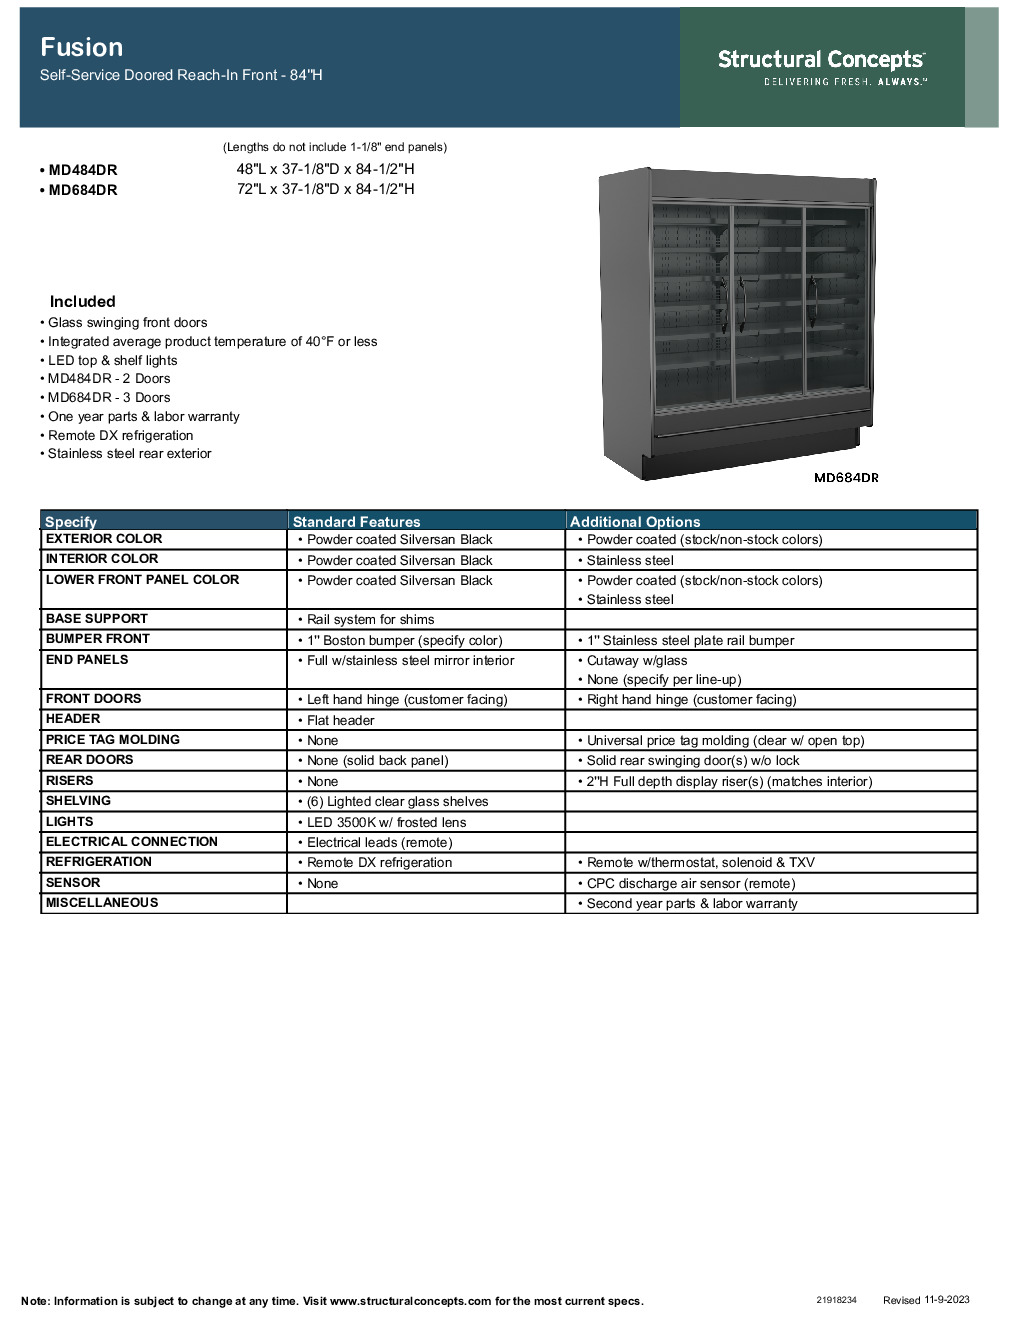 Structural Concepts MD684DR Self-Serve Refrigerated Display Case